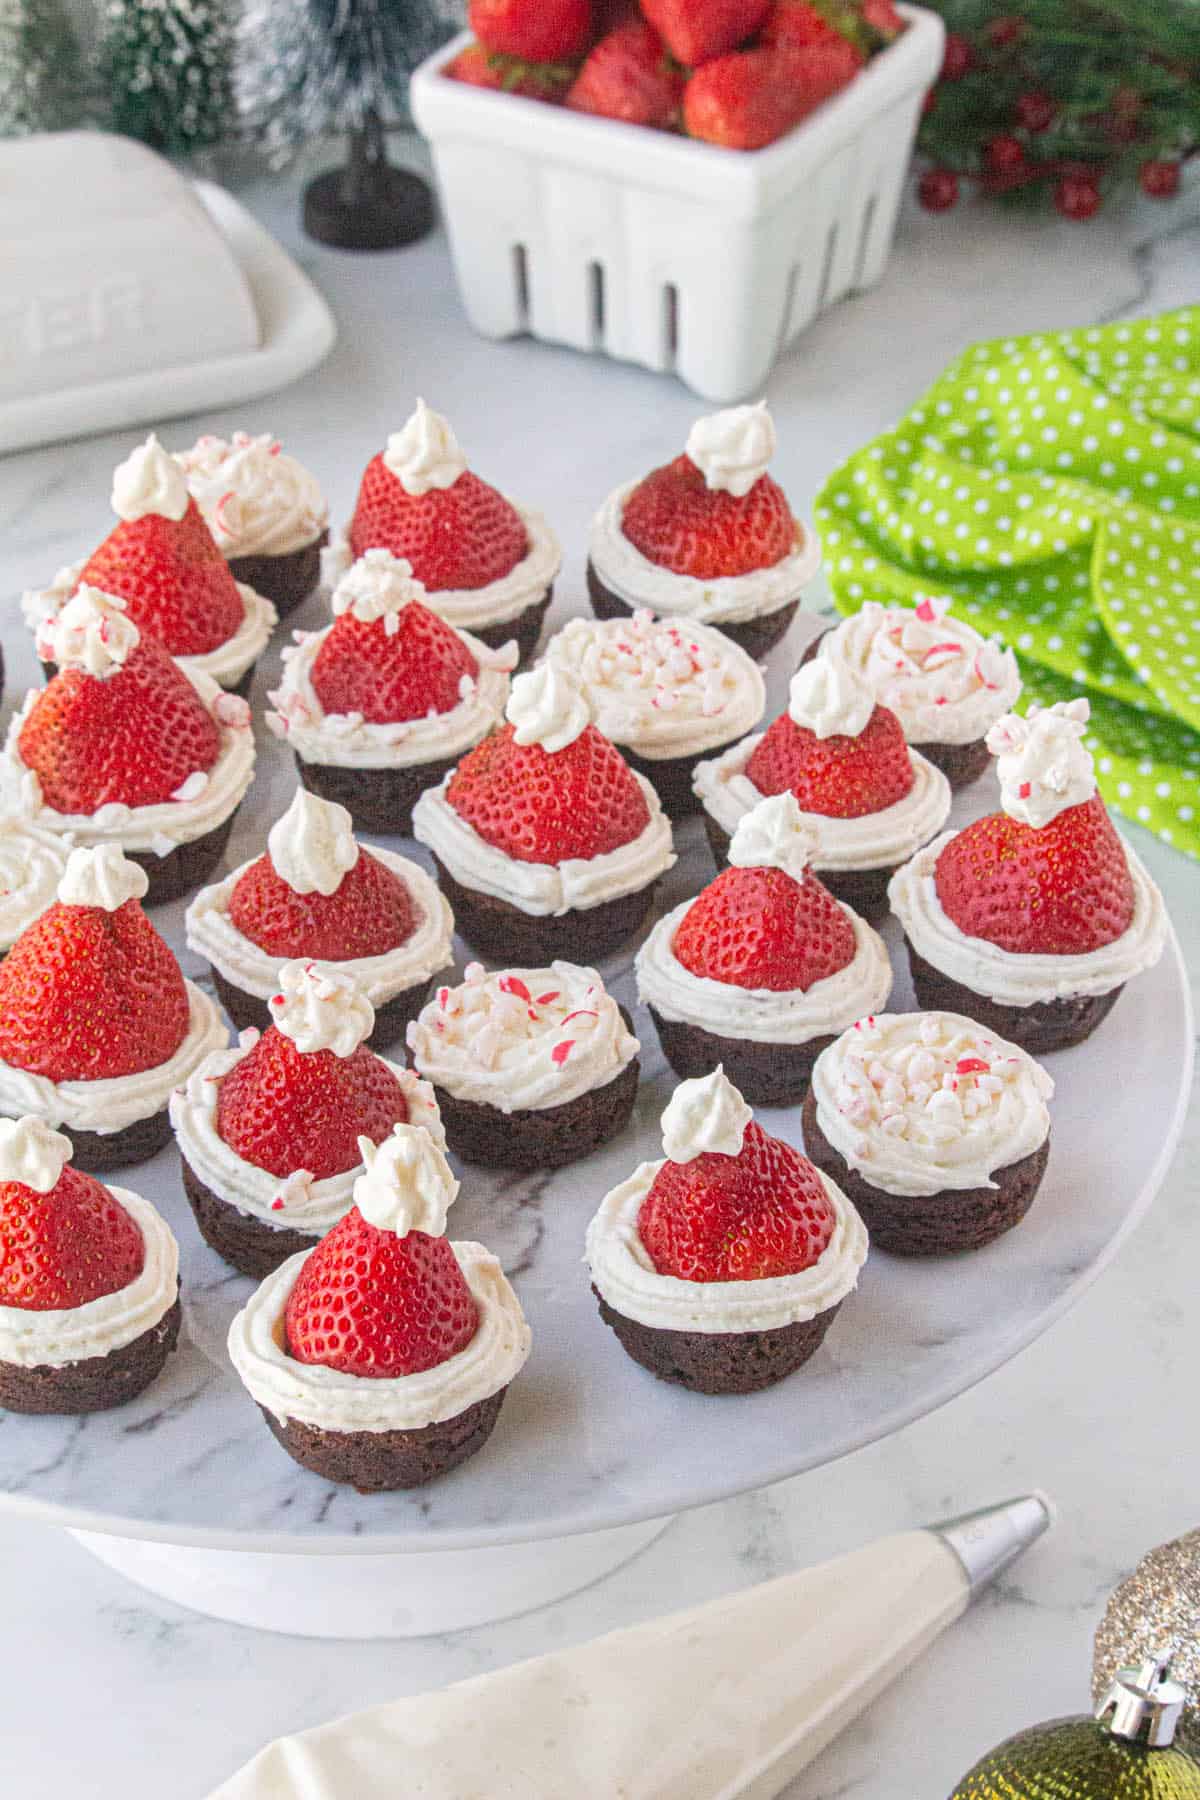 A platter filled with brownies topped with fresh strawberries and decorated look like Santa hats.